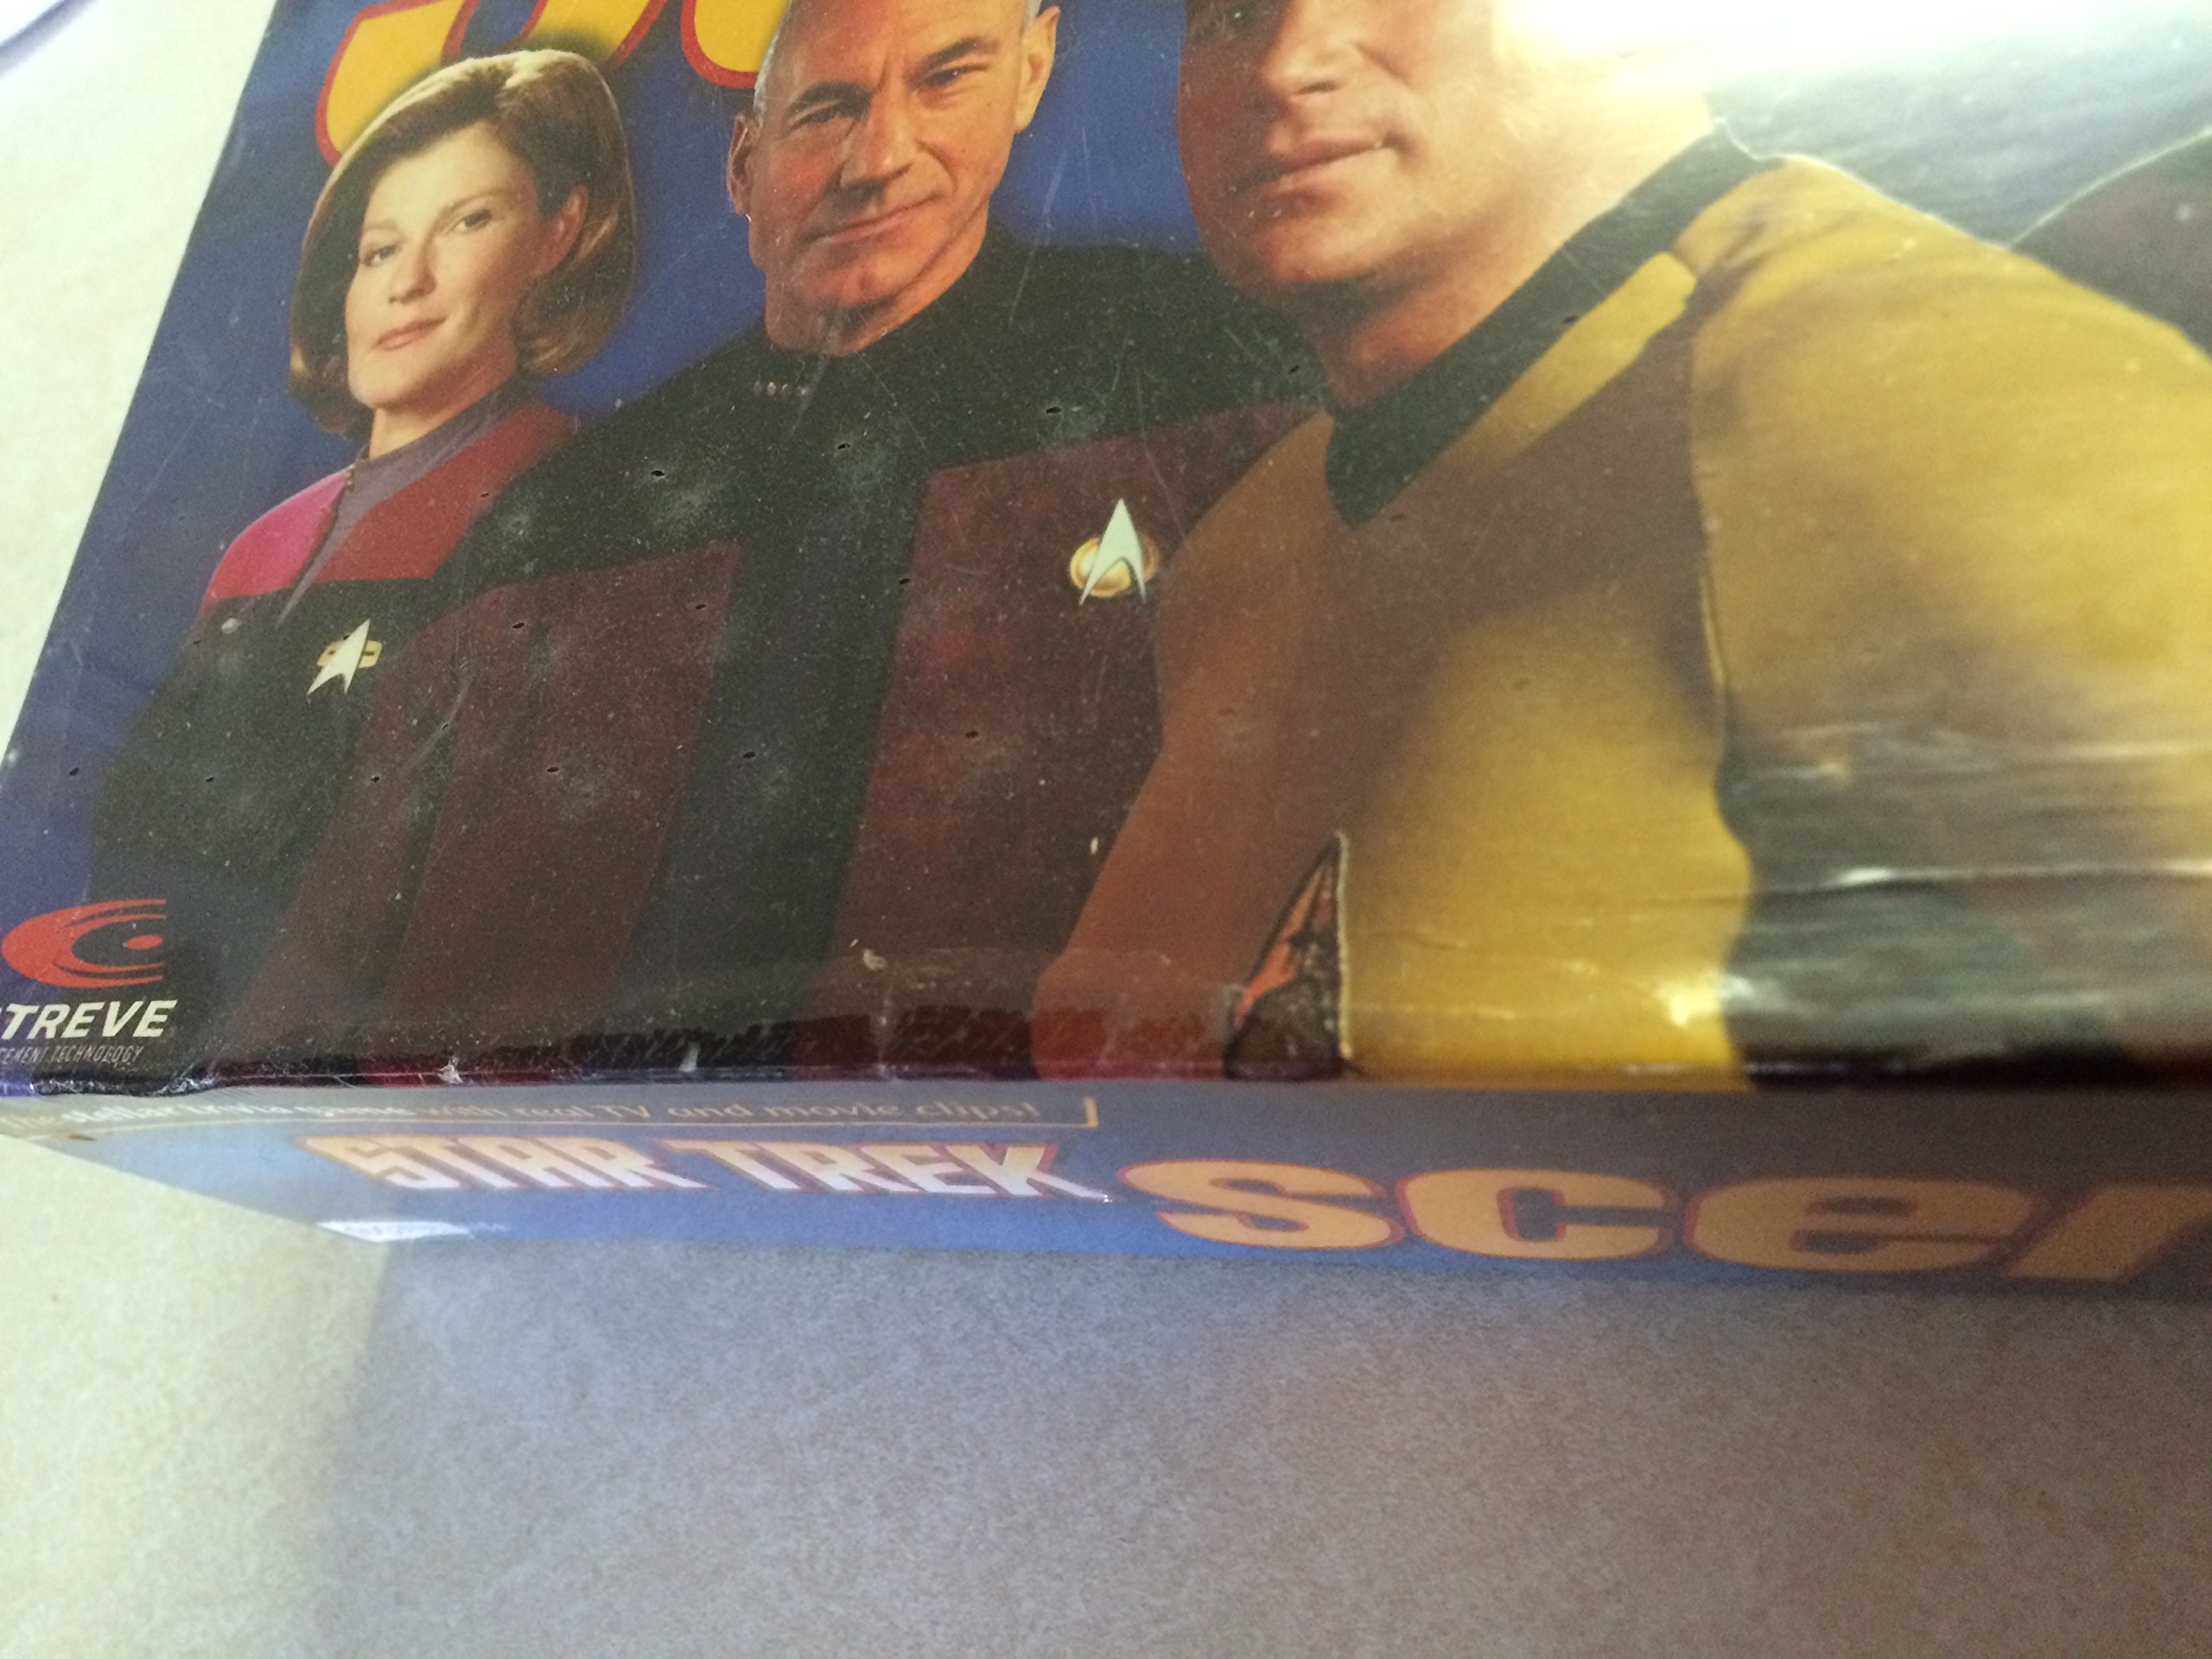 Mattel Star Trek Scene It? DVD Game with Real TV and Movie Clips